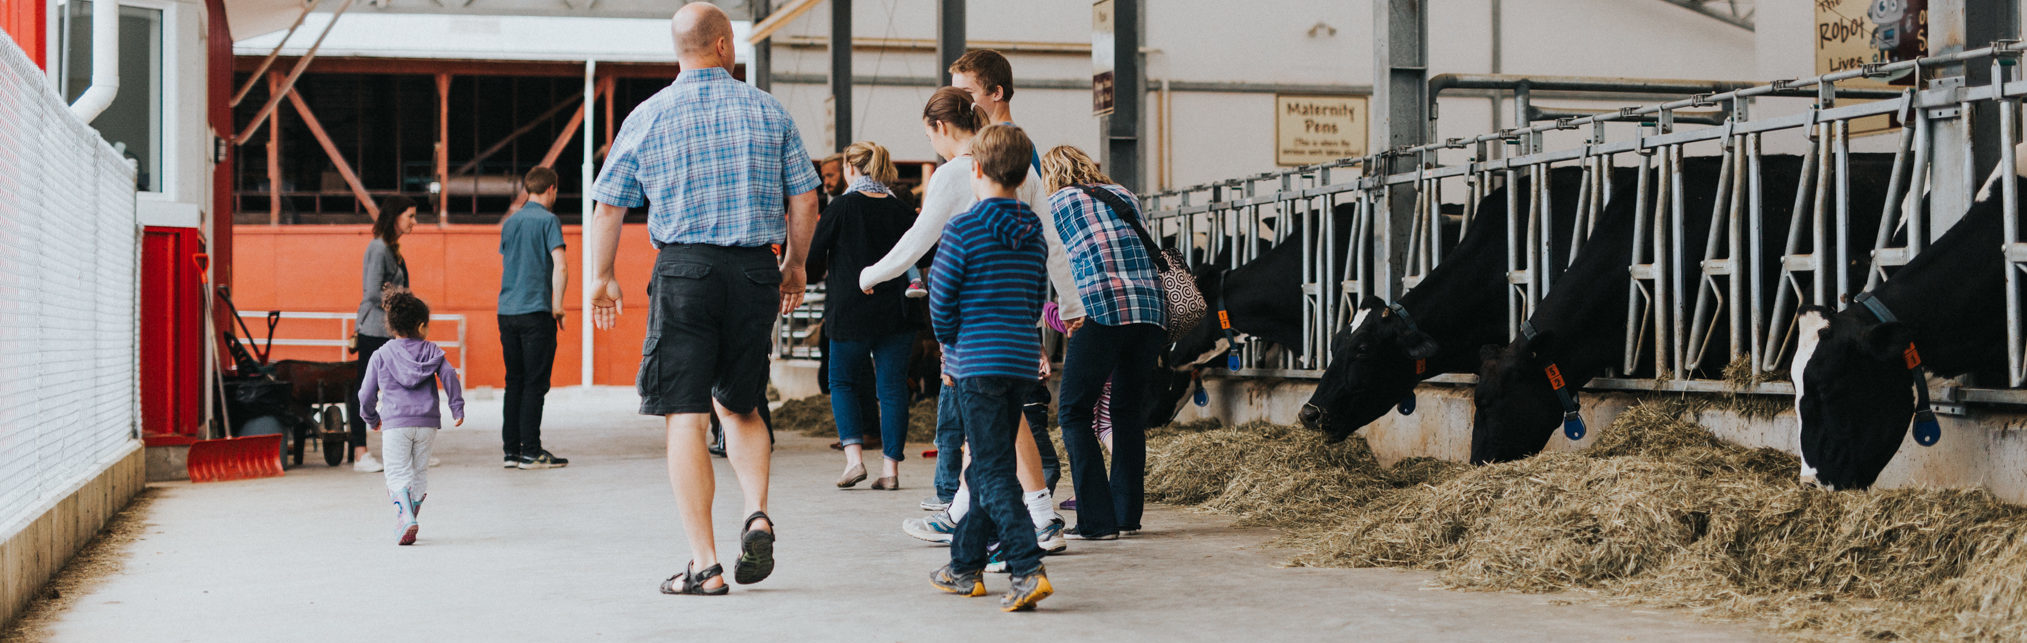 family walking through barn with cows